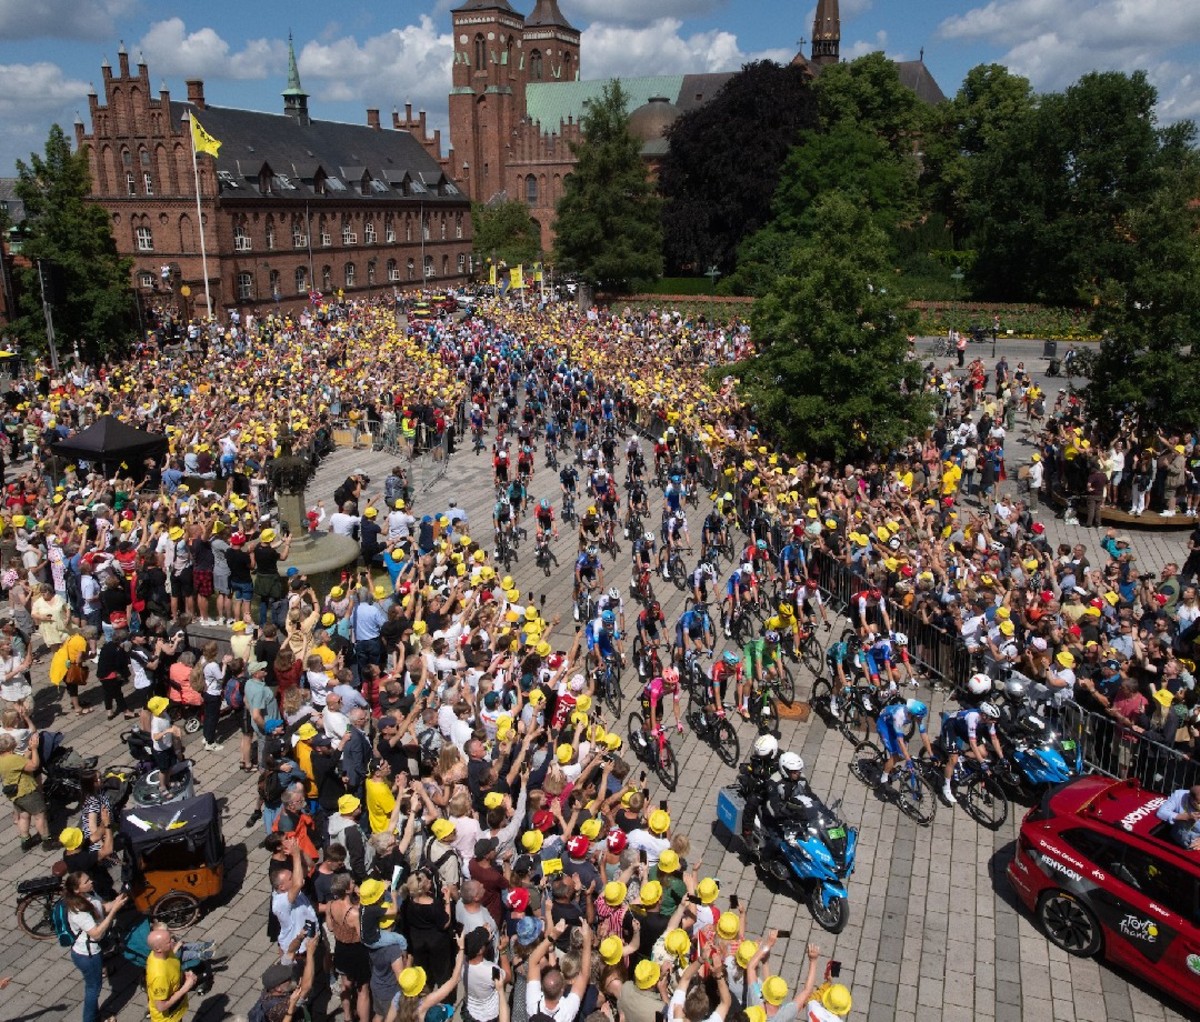 Cyclers pedal past fans in Denmark town during the 2022 Tour de France